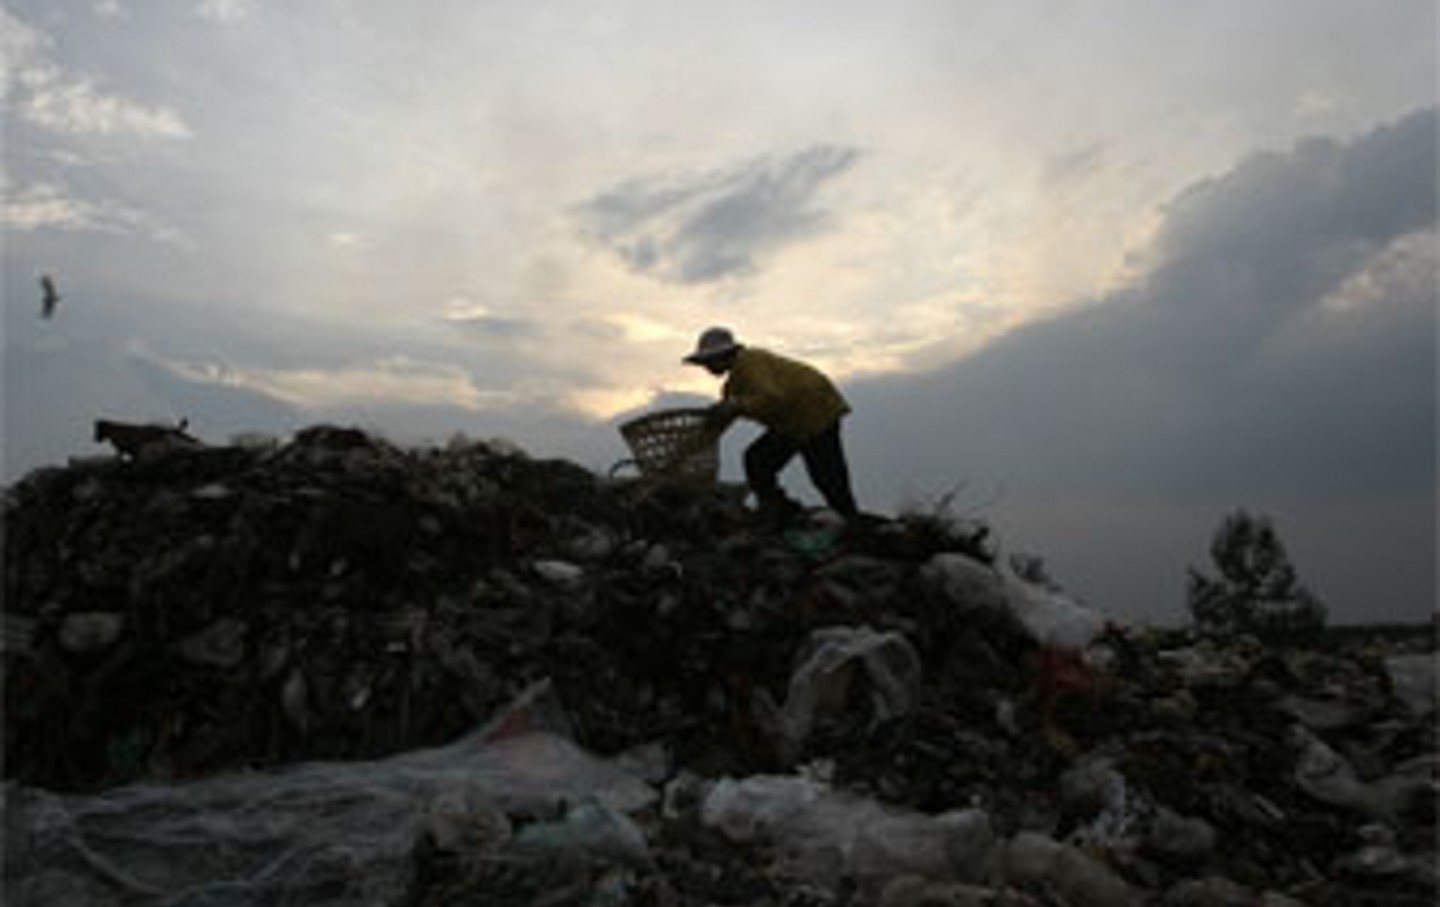 A man ekes out a living scavenging on a garbage dump in the Philippines.